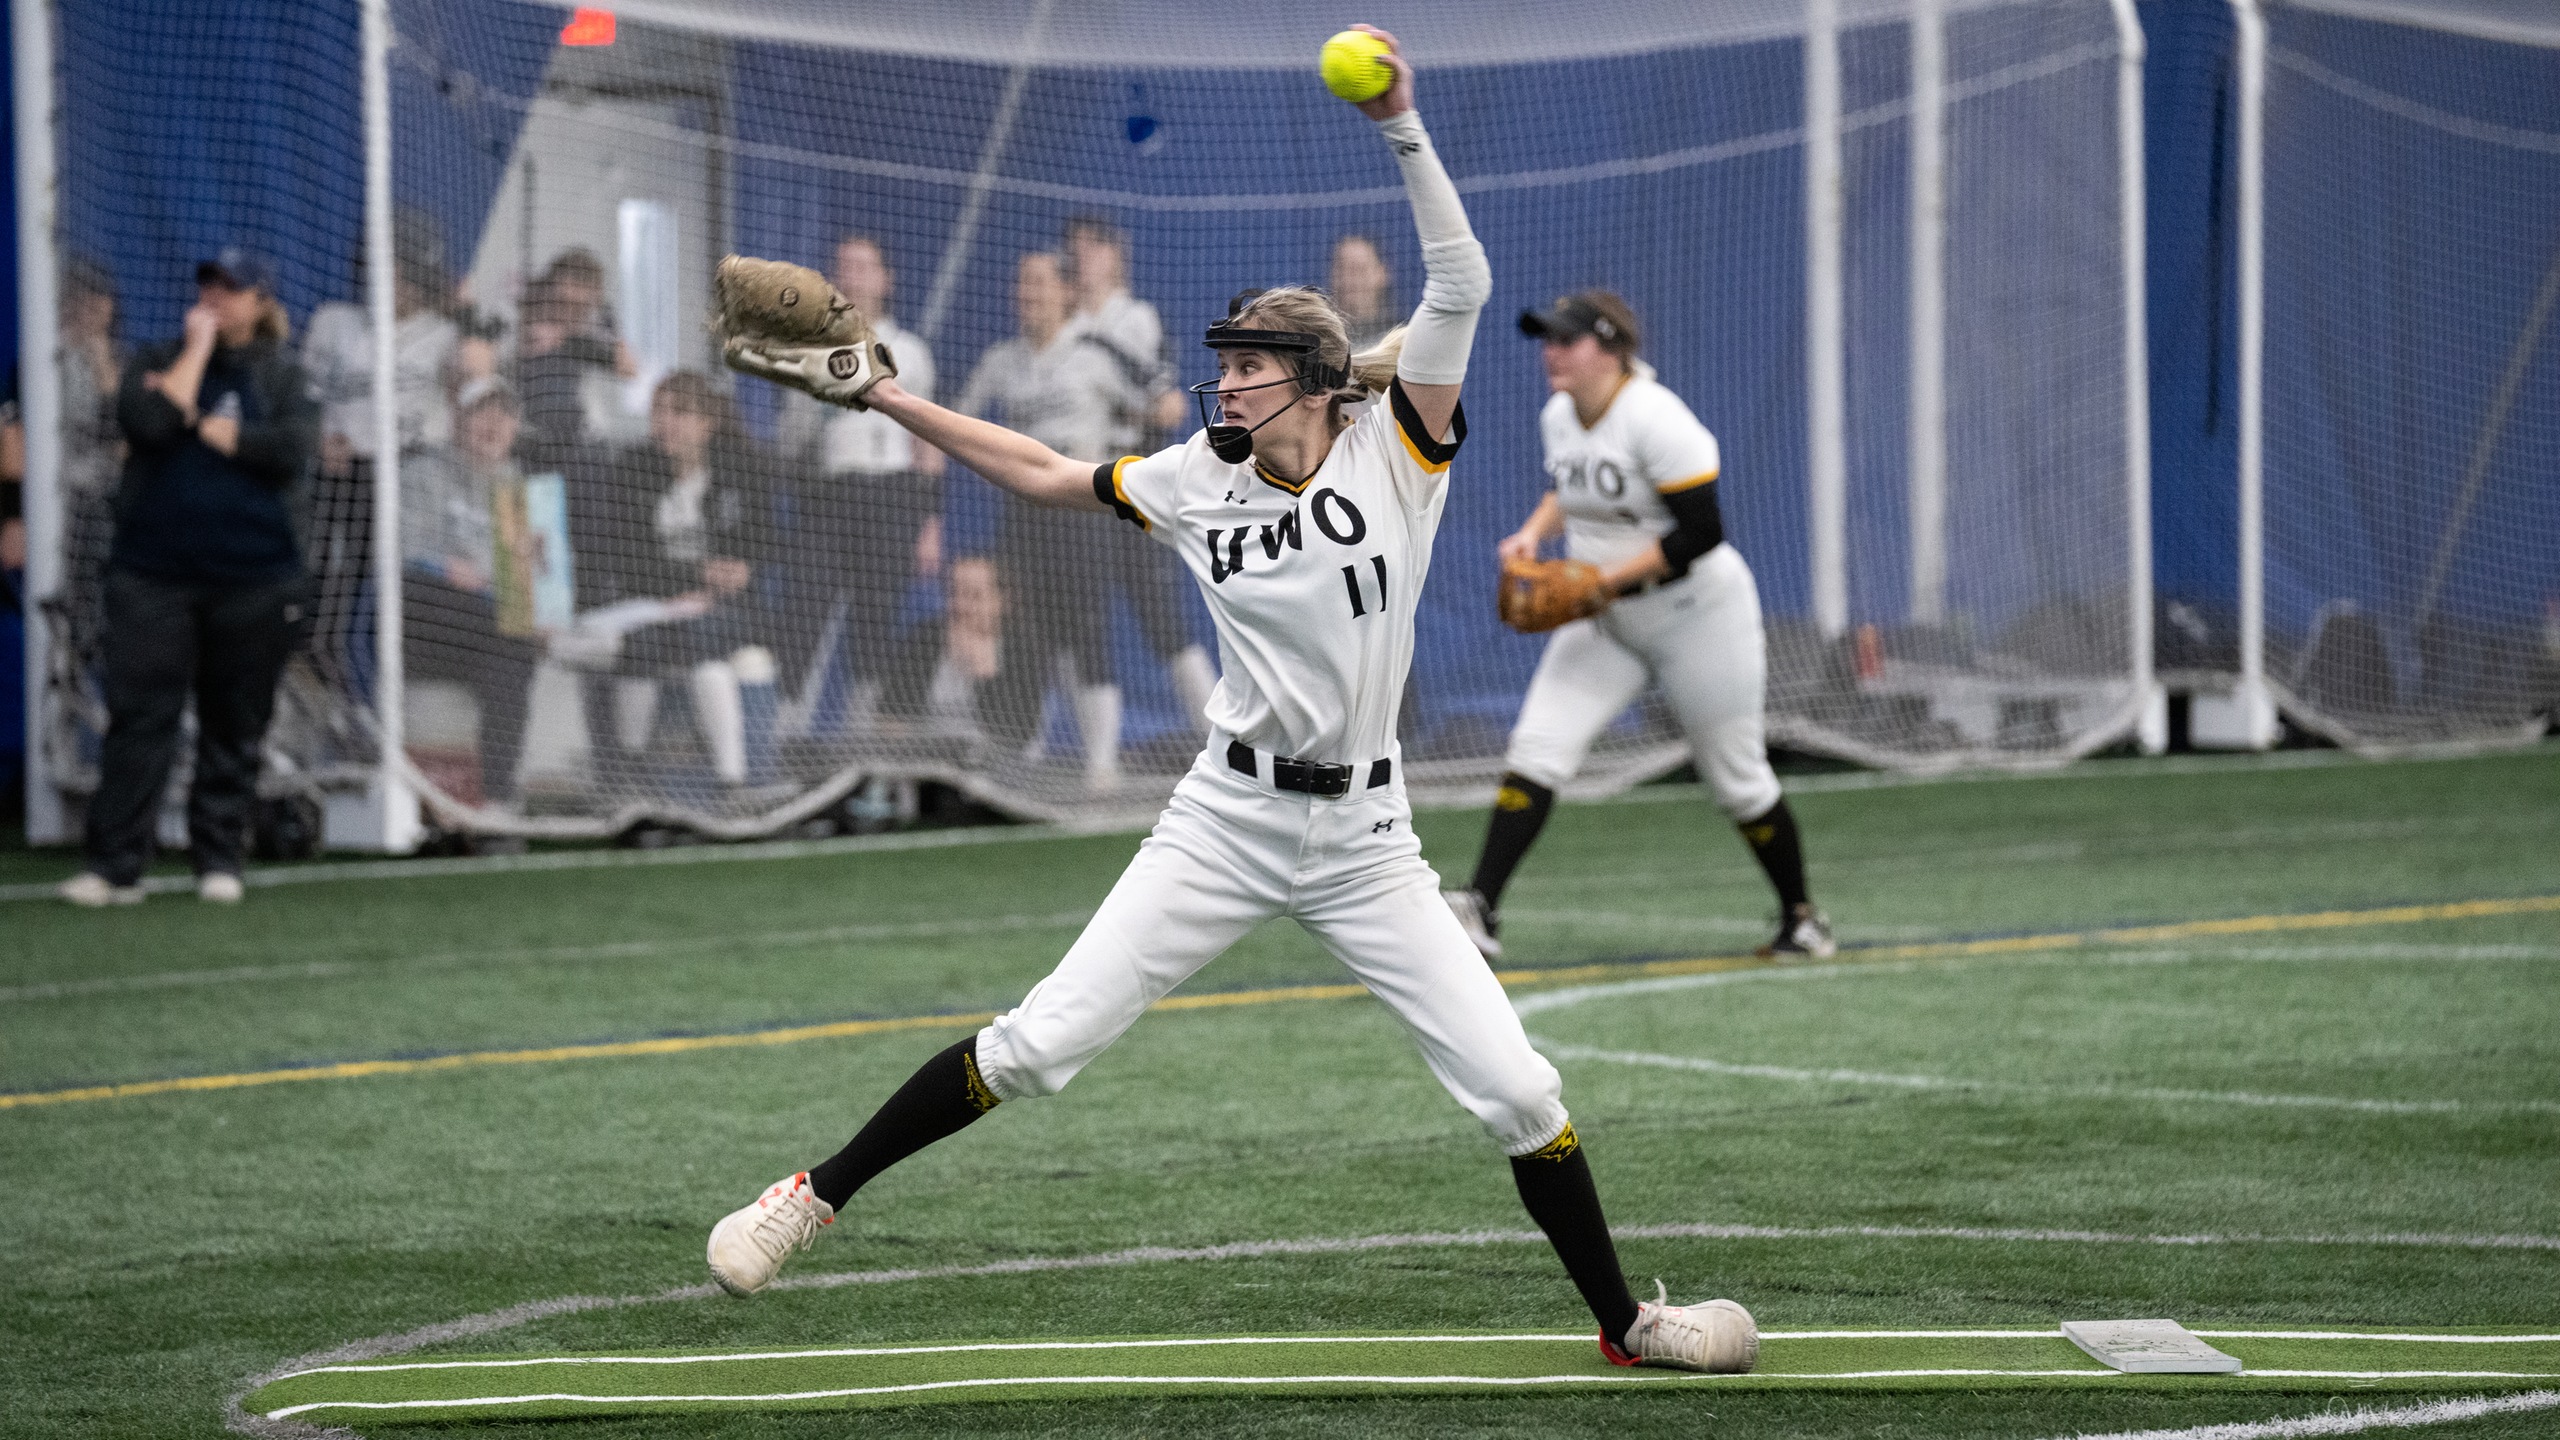 Mia Crotty allowed just three hits and recorded at least one strikeout in each inning against the Vikings.